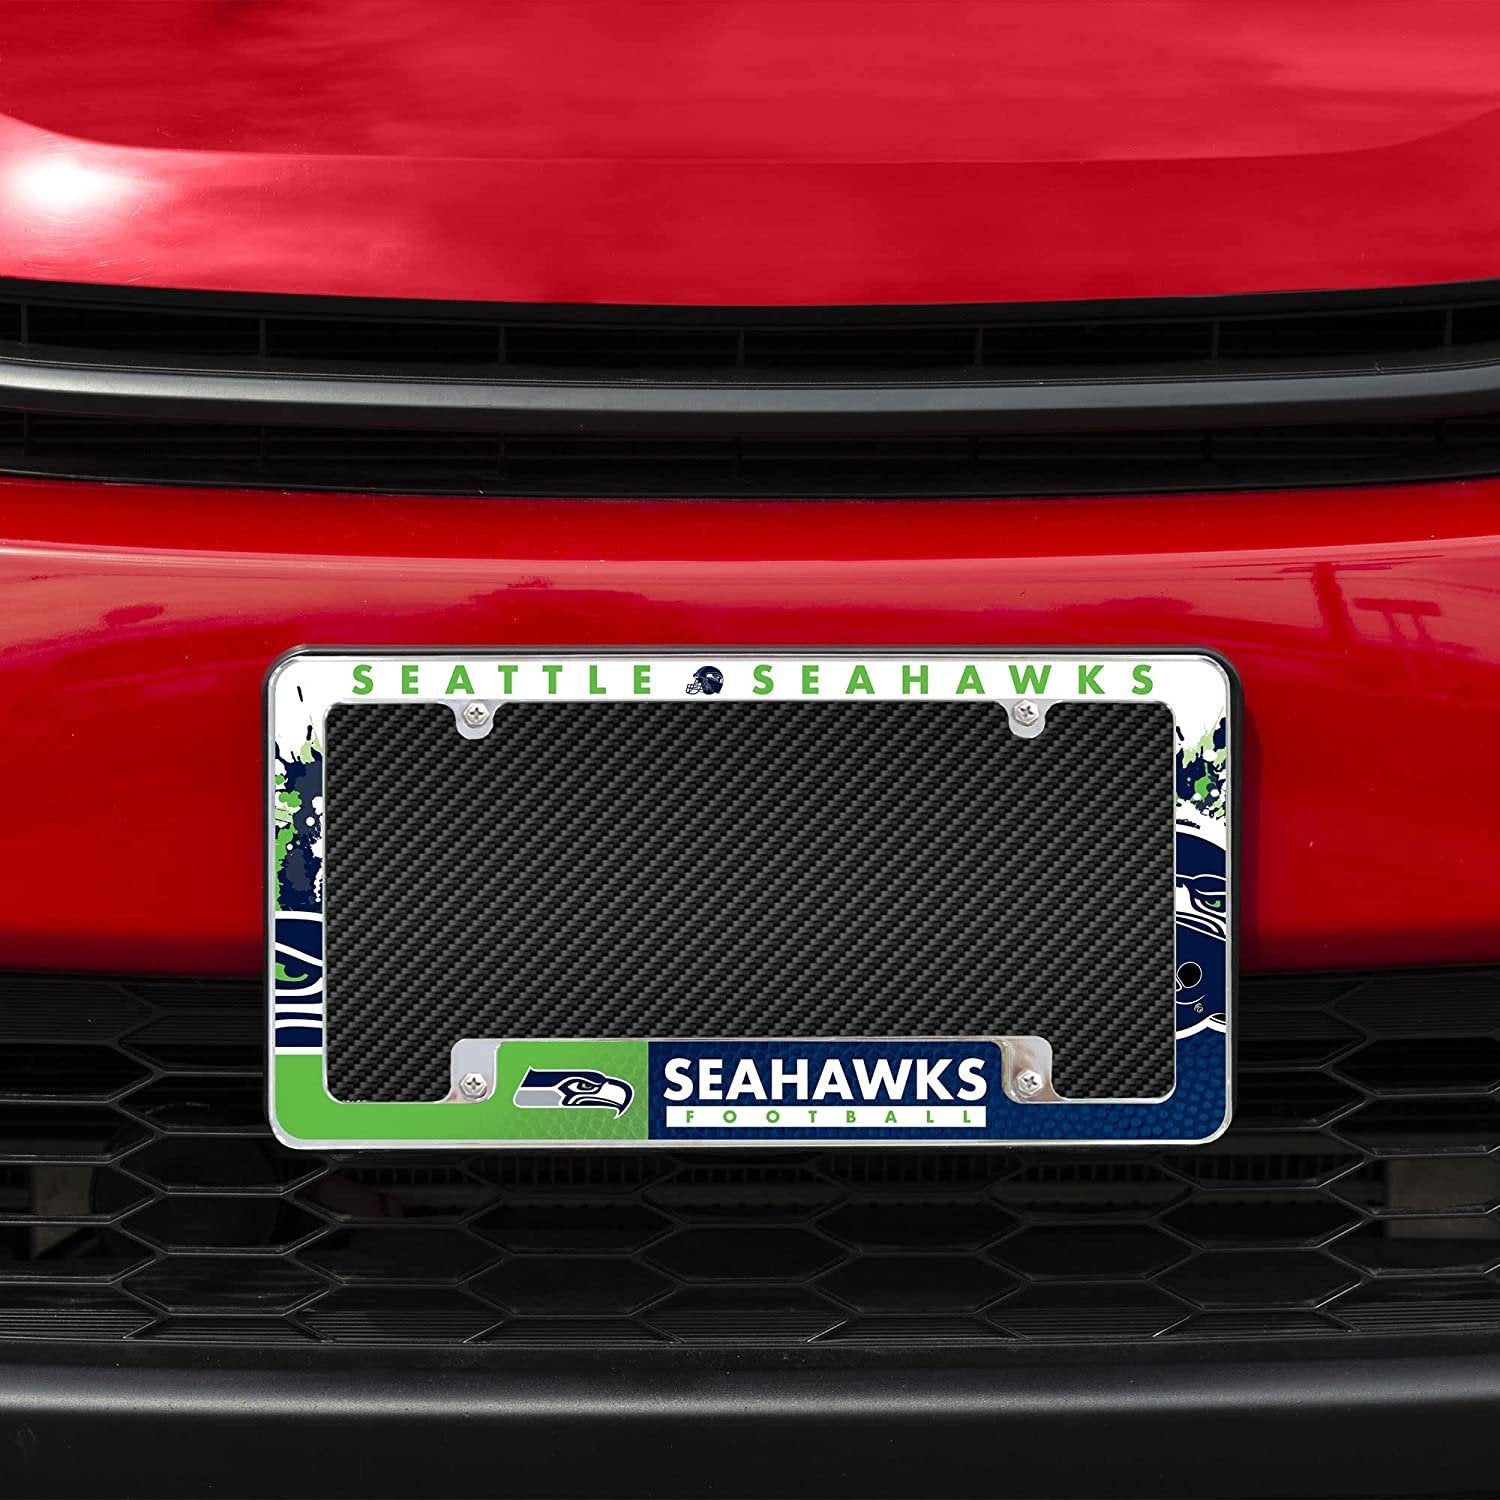 Seattle Seahawks Metal License Plate Frame Chrome Tag Cover All Over Design 12x6 Inch